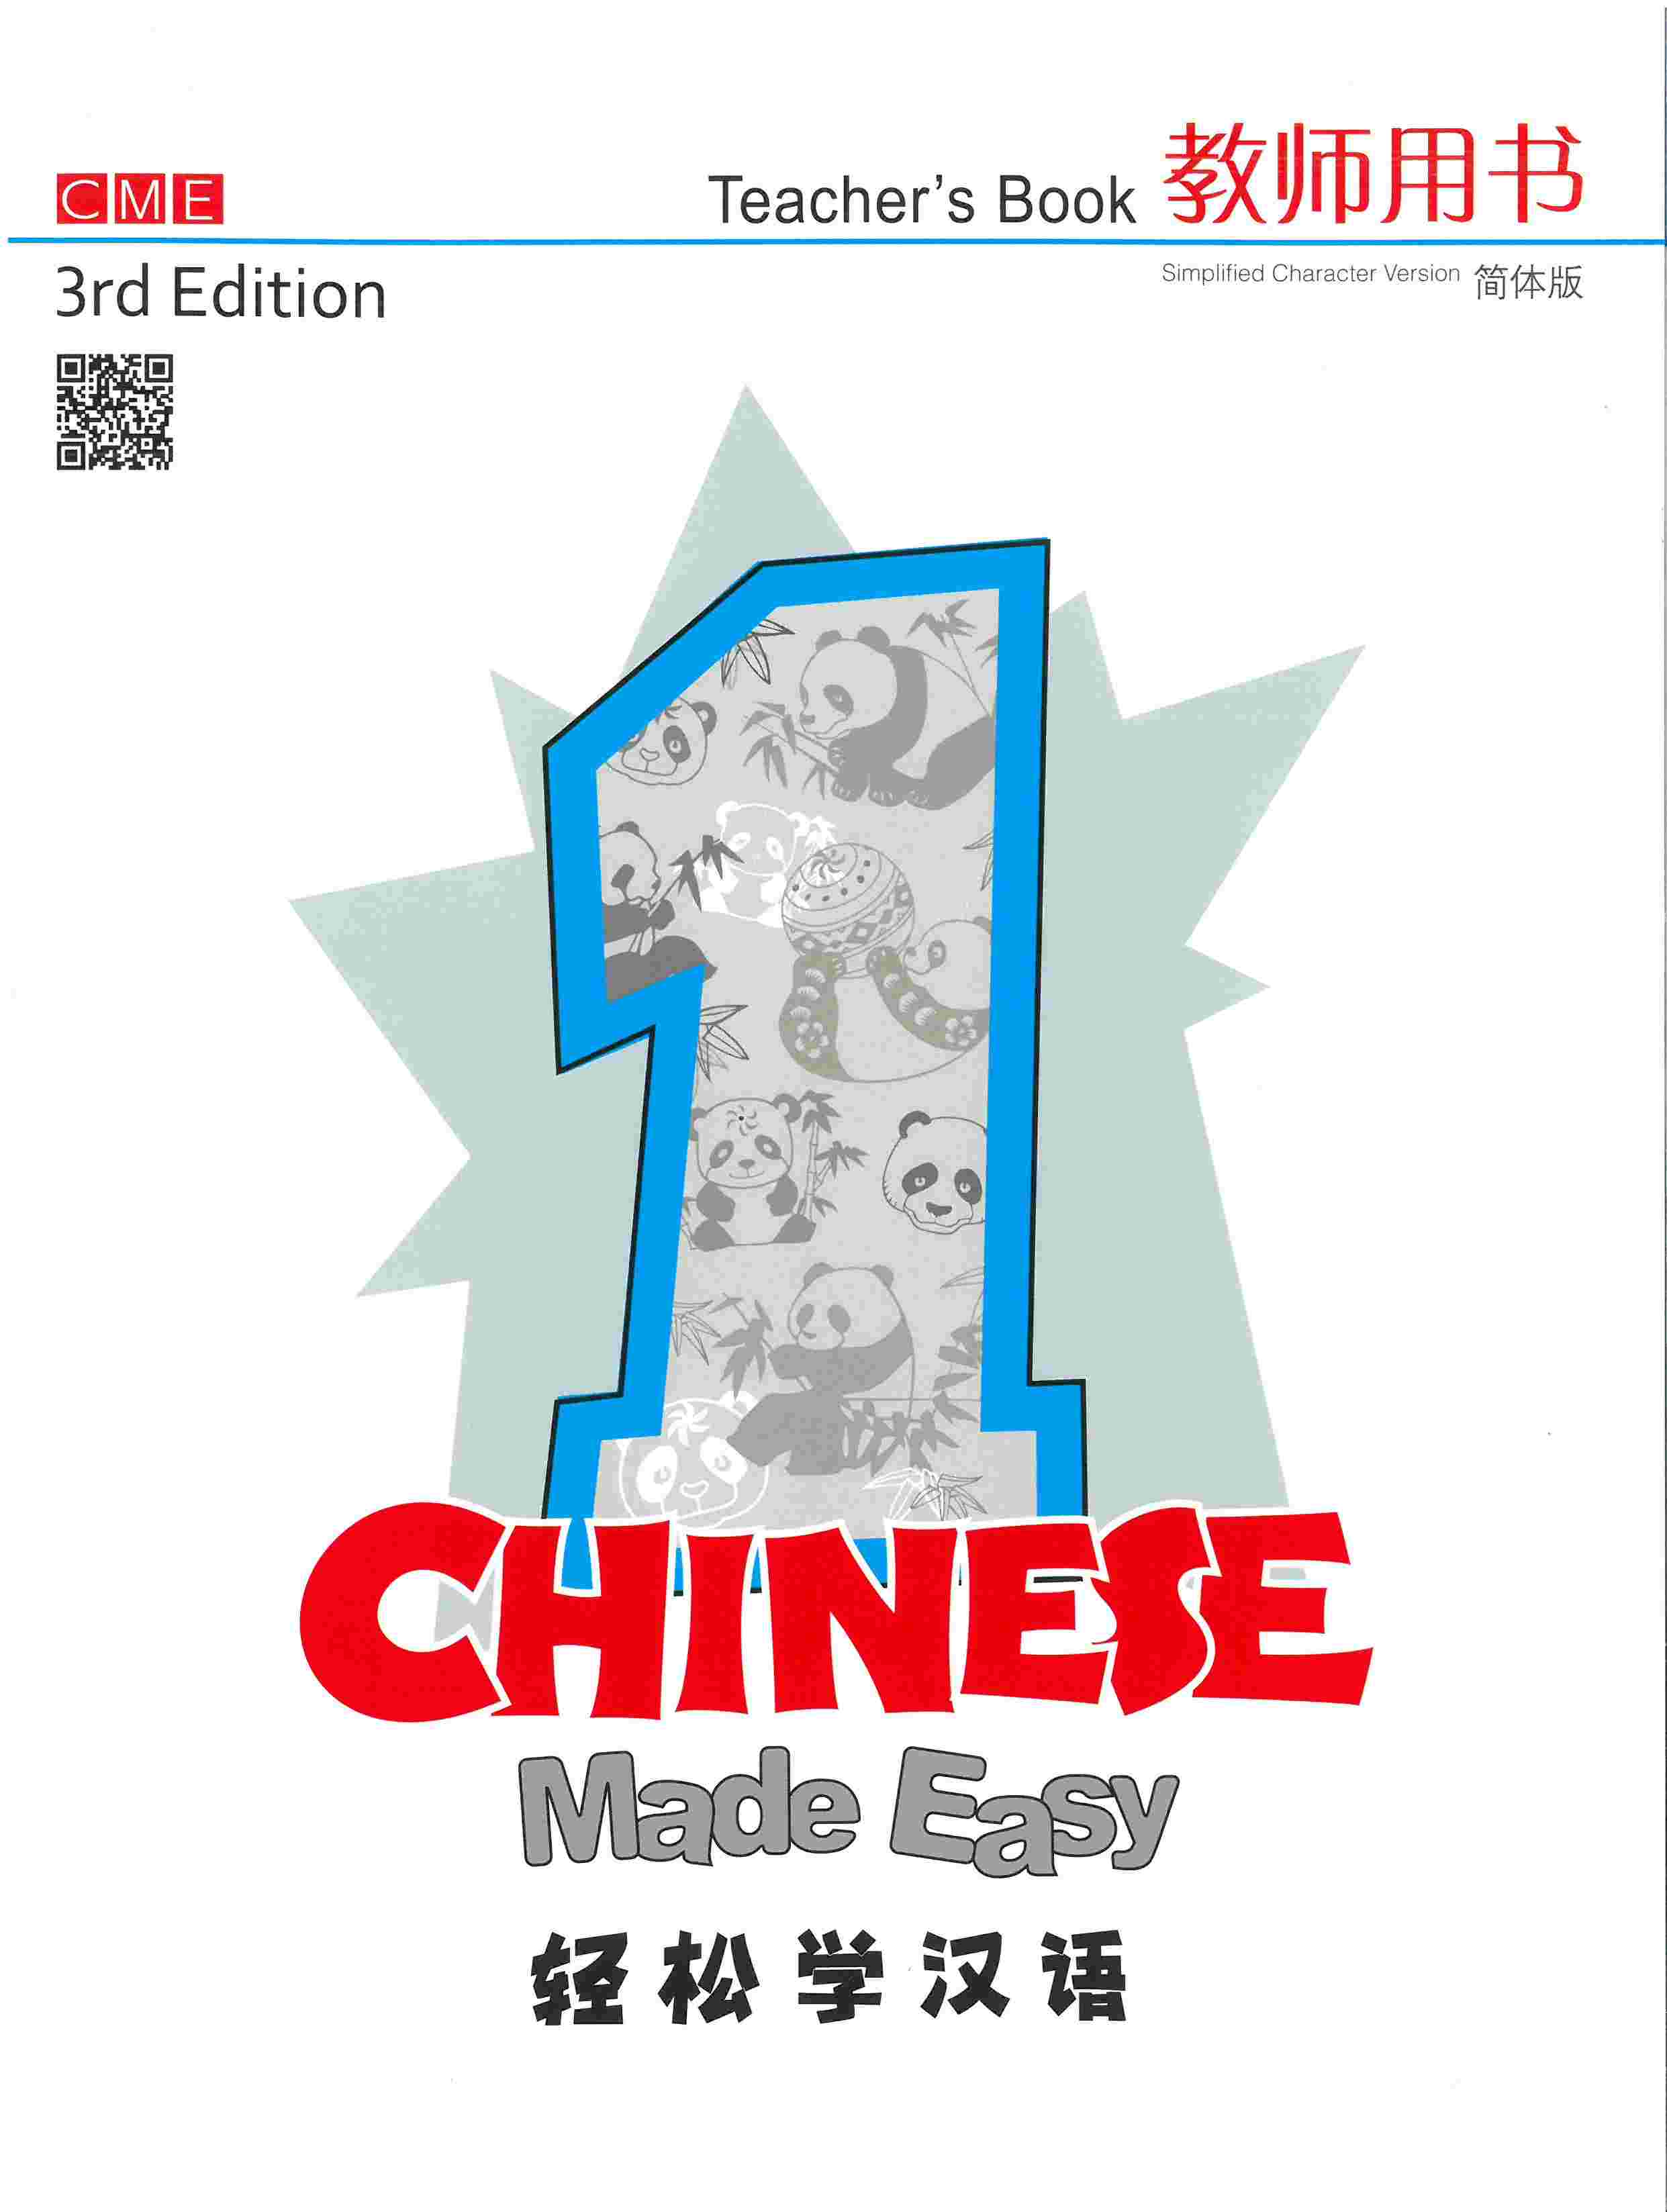 Chinese Made Easy Teacher's Book 1 (Simplified Characters)  轻松学汉语教师用书一